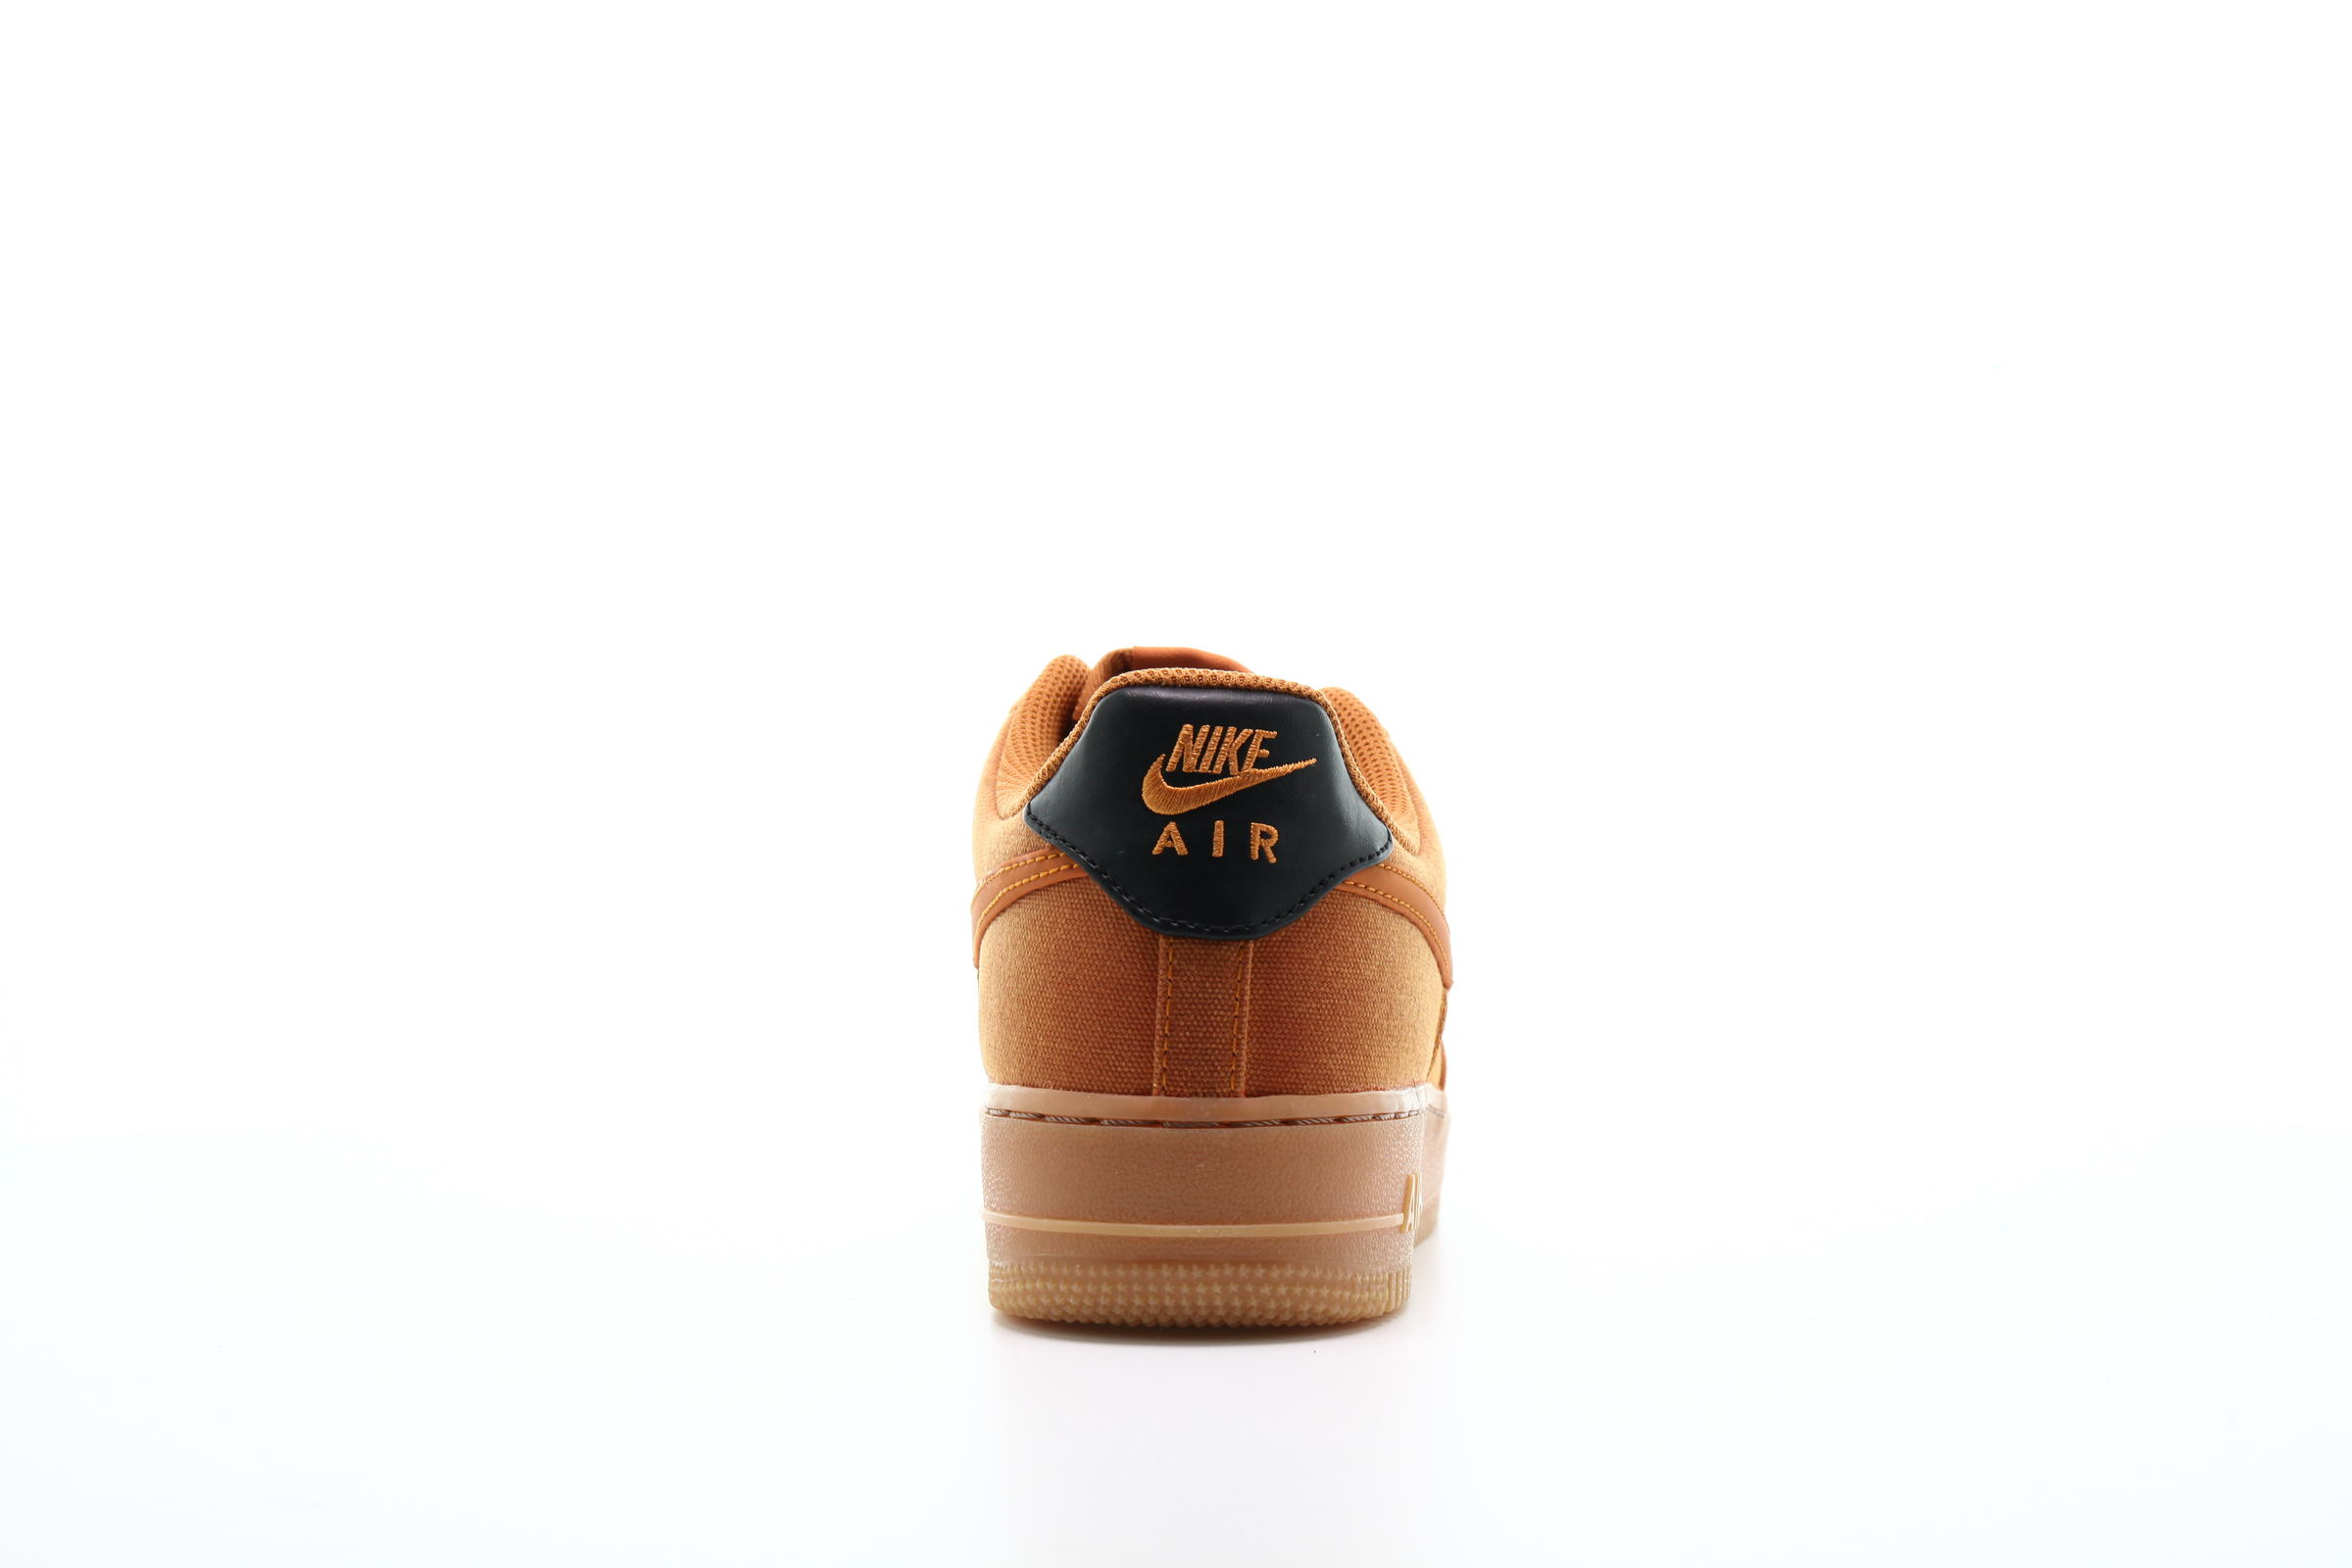 Nike Air Force 1 '07 Lv8 Style "Monarch"